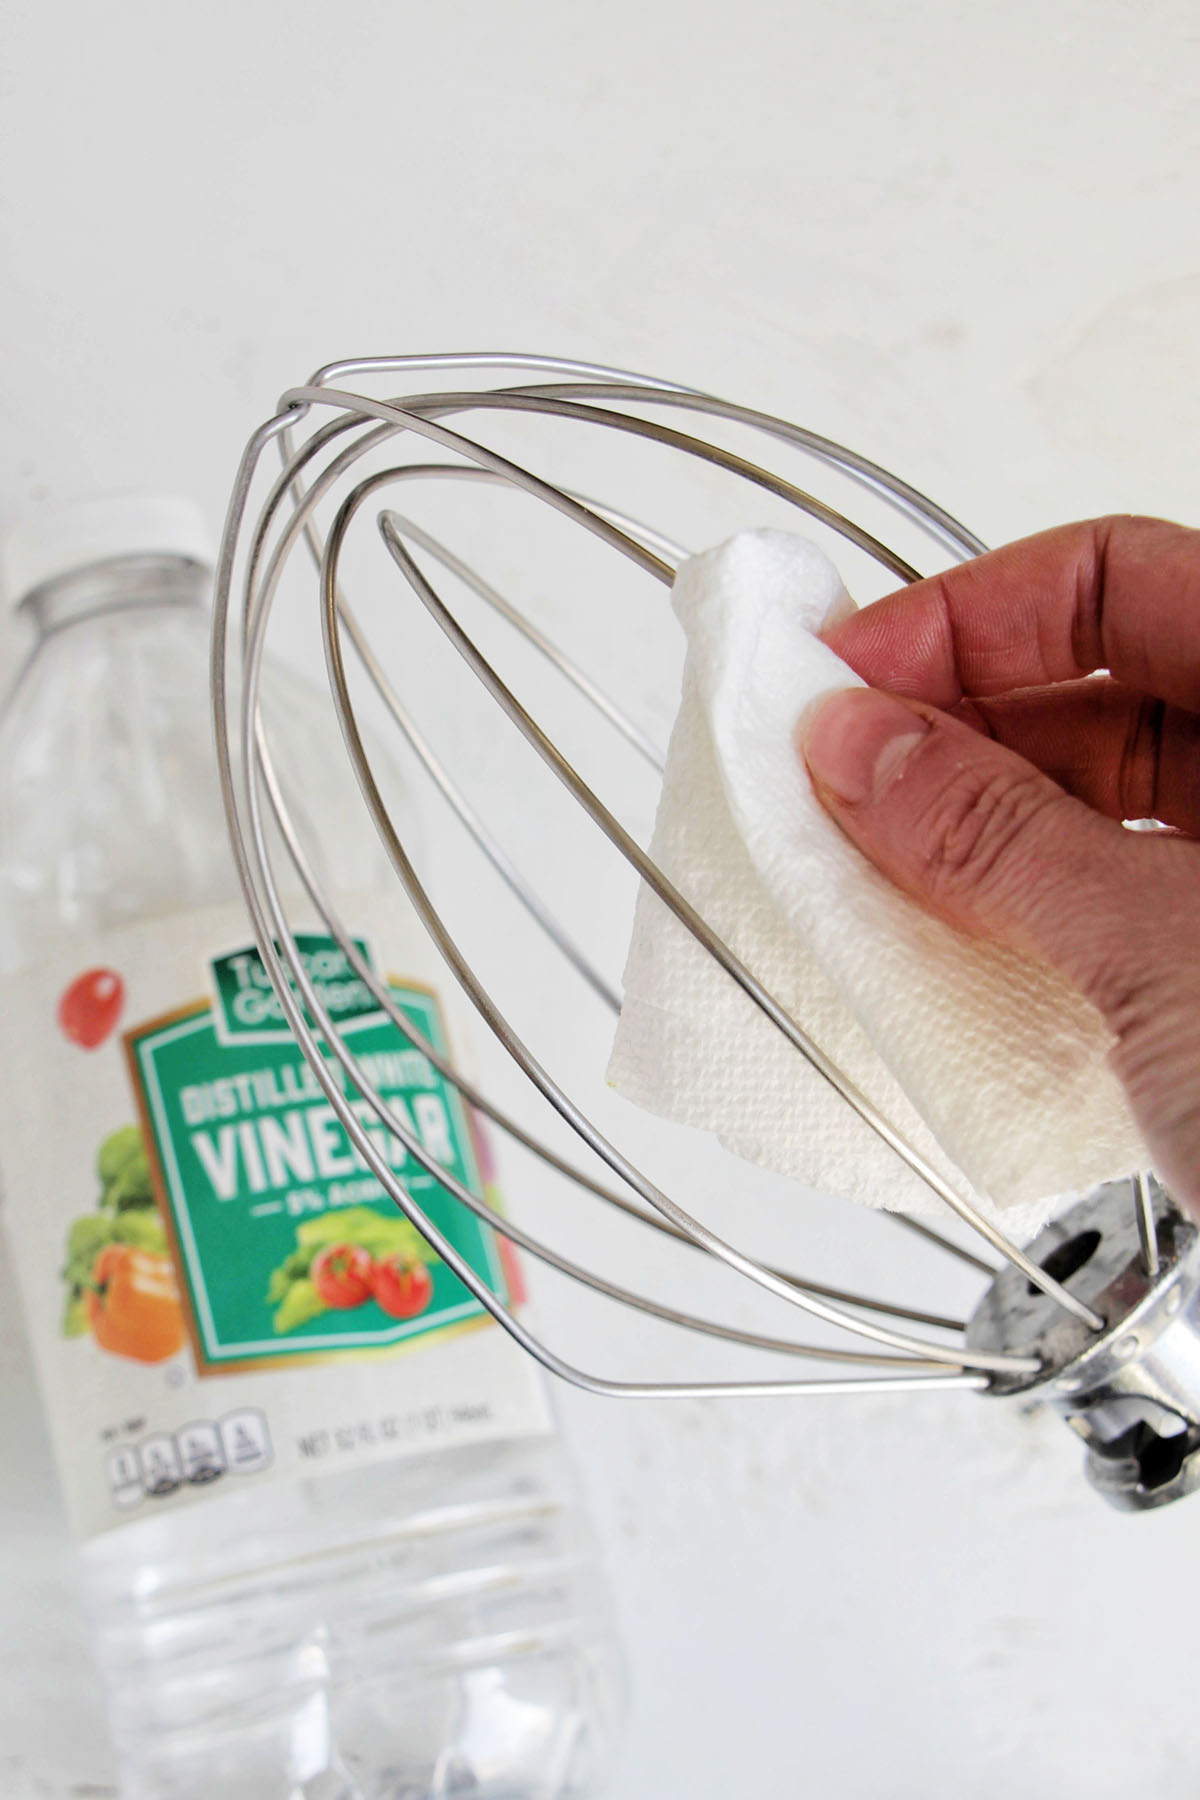 hand cleaning a whisk mixer attachment with a paper towel.